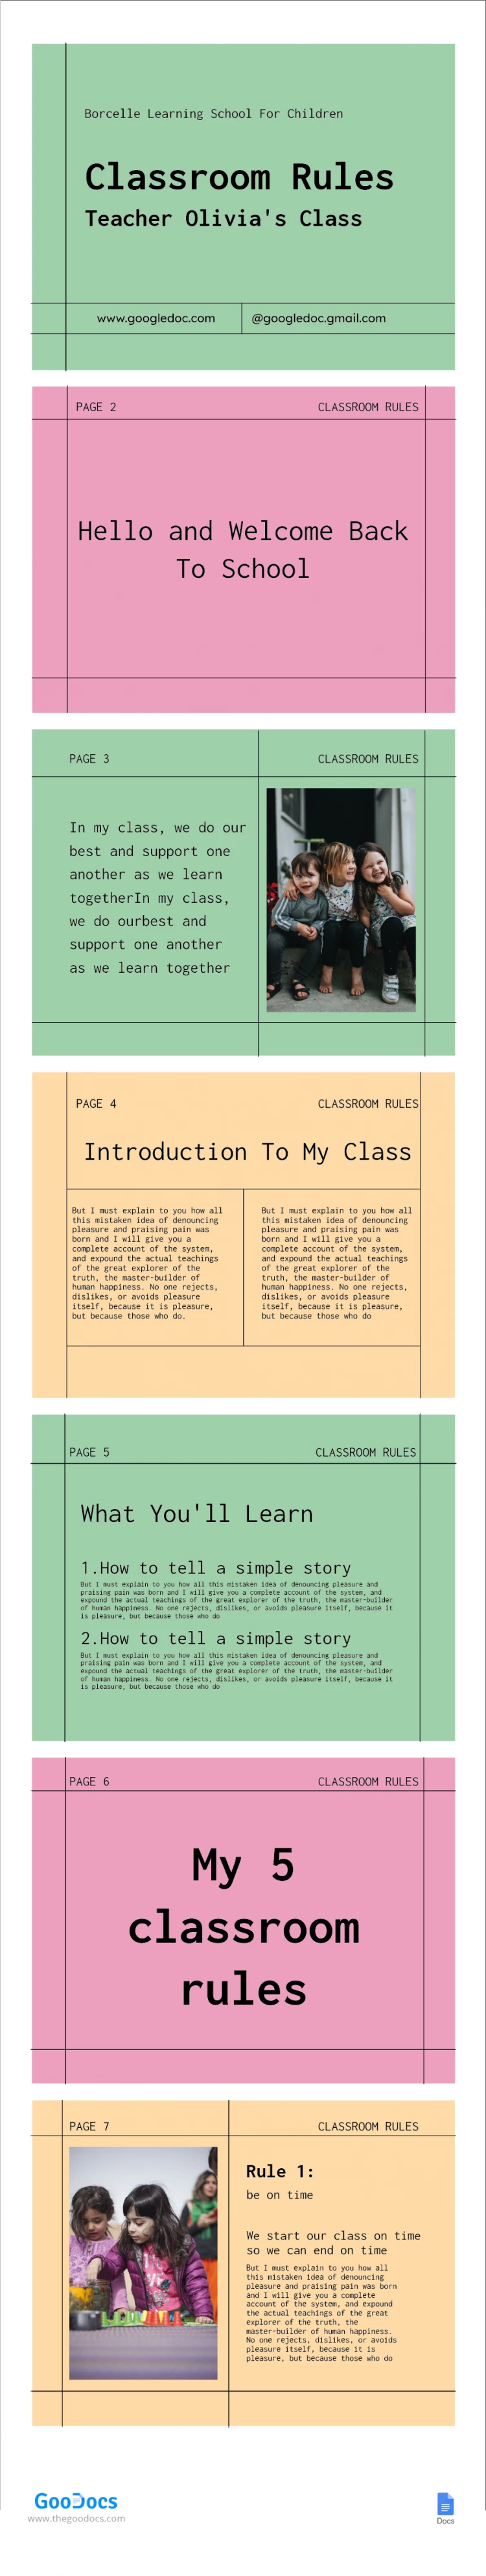 Colorful Classroom Rules - free Google Docs Template - 10064881